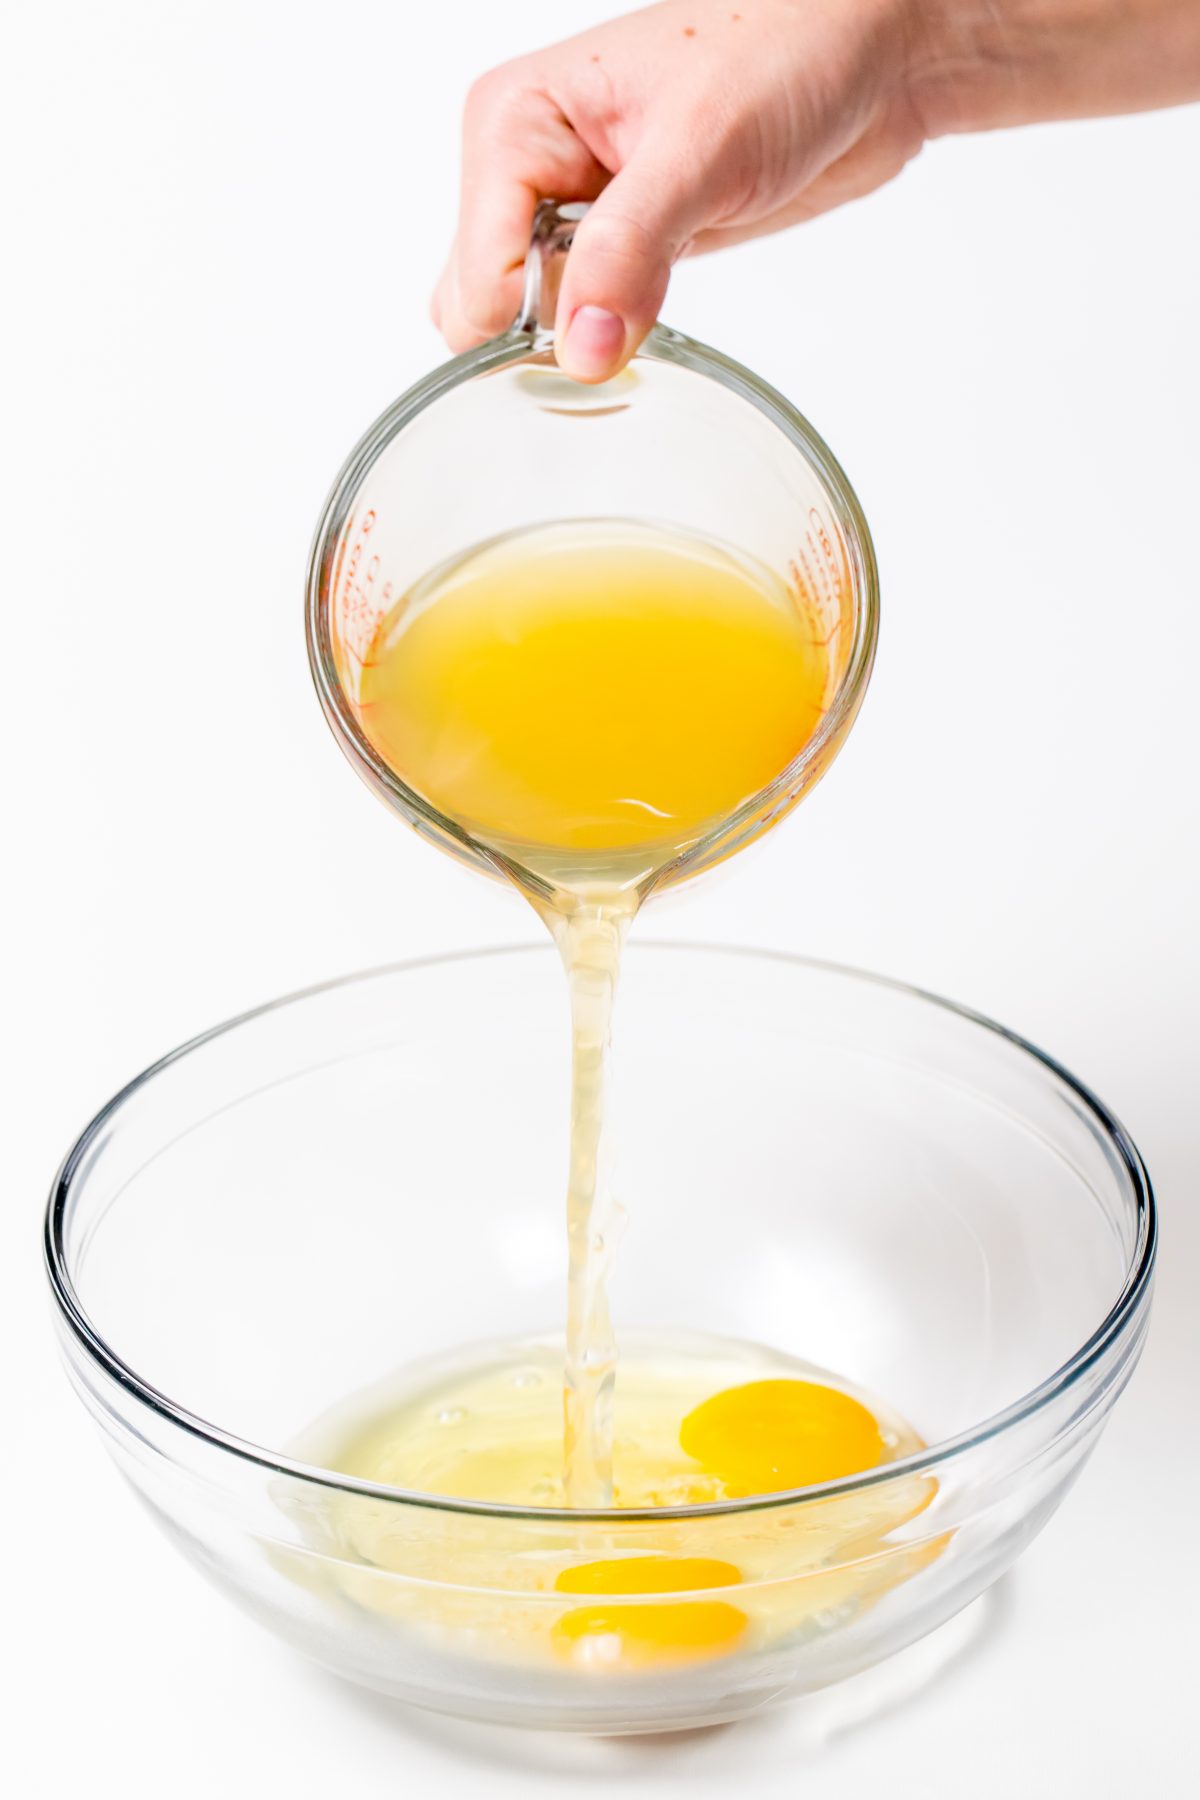 Whisk together eggs and stock